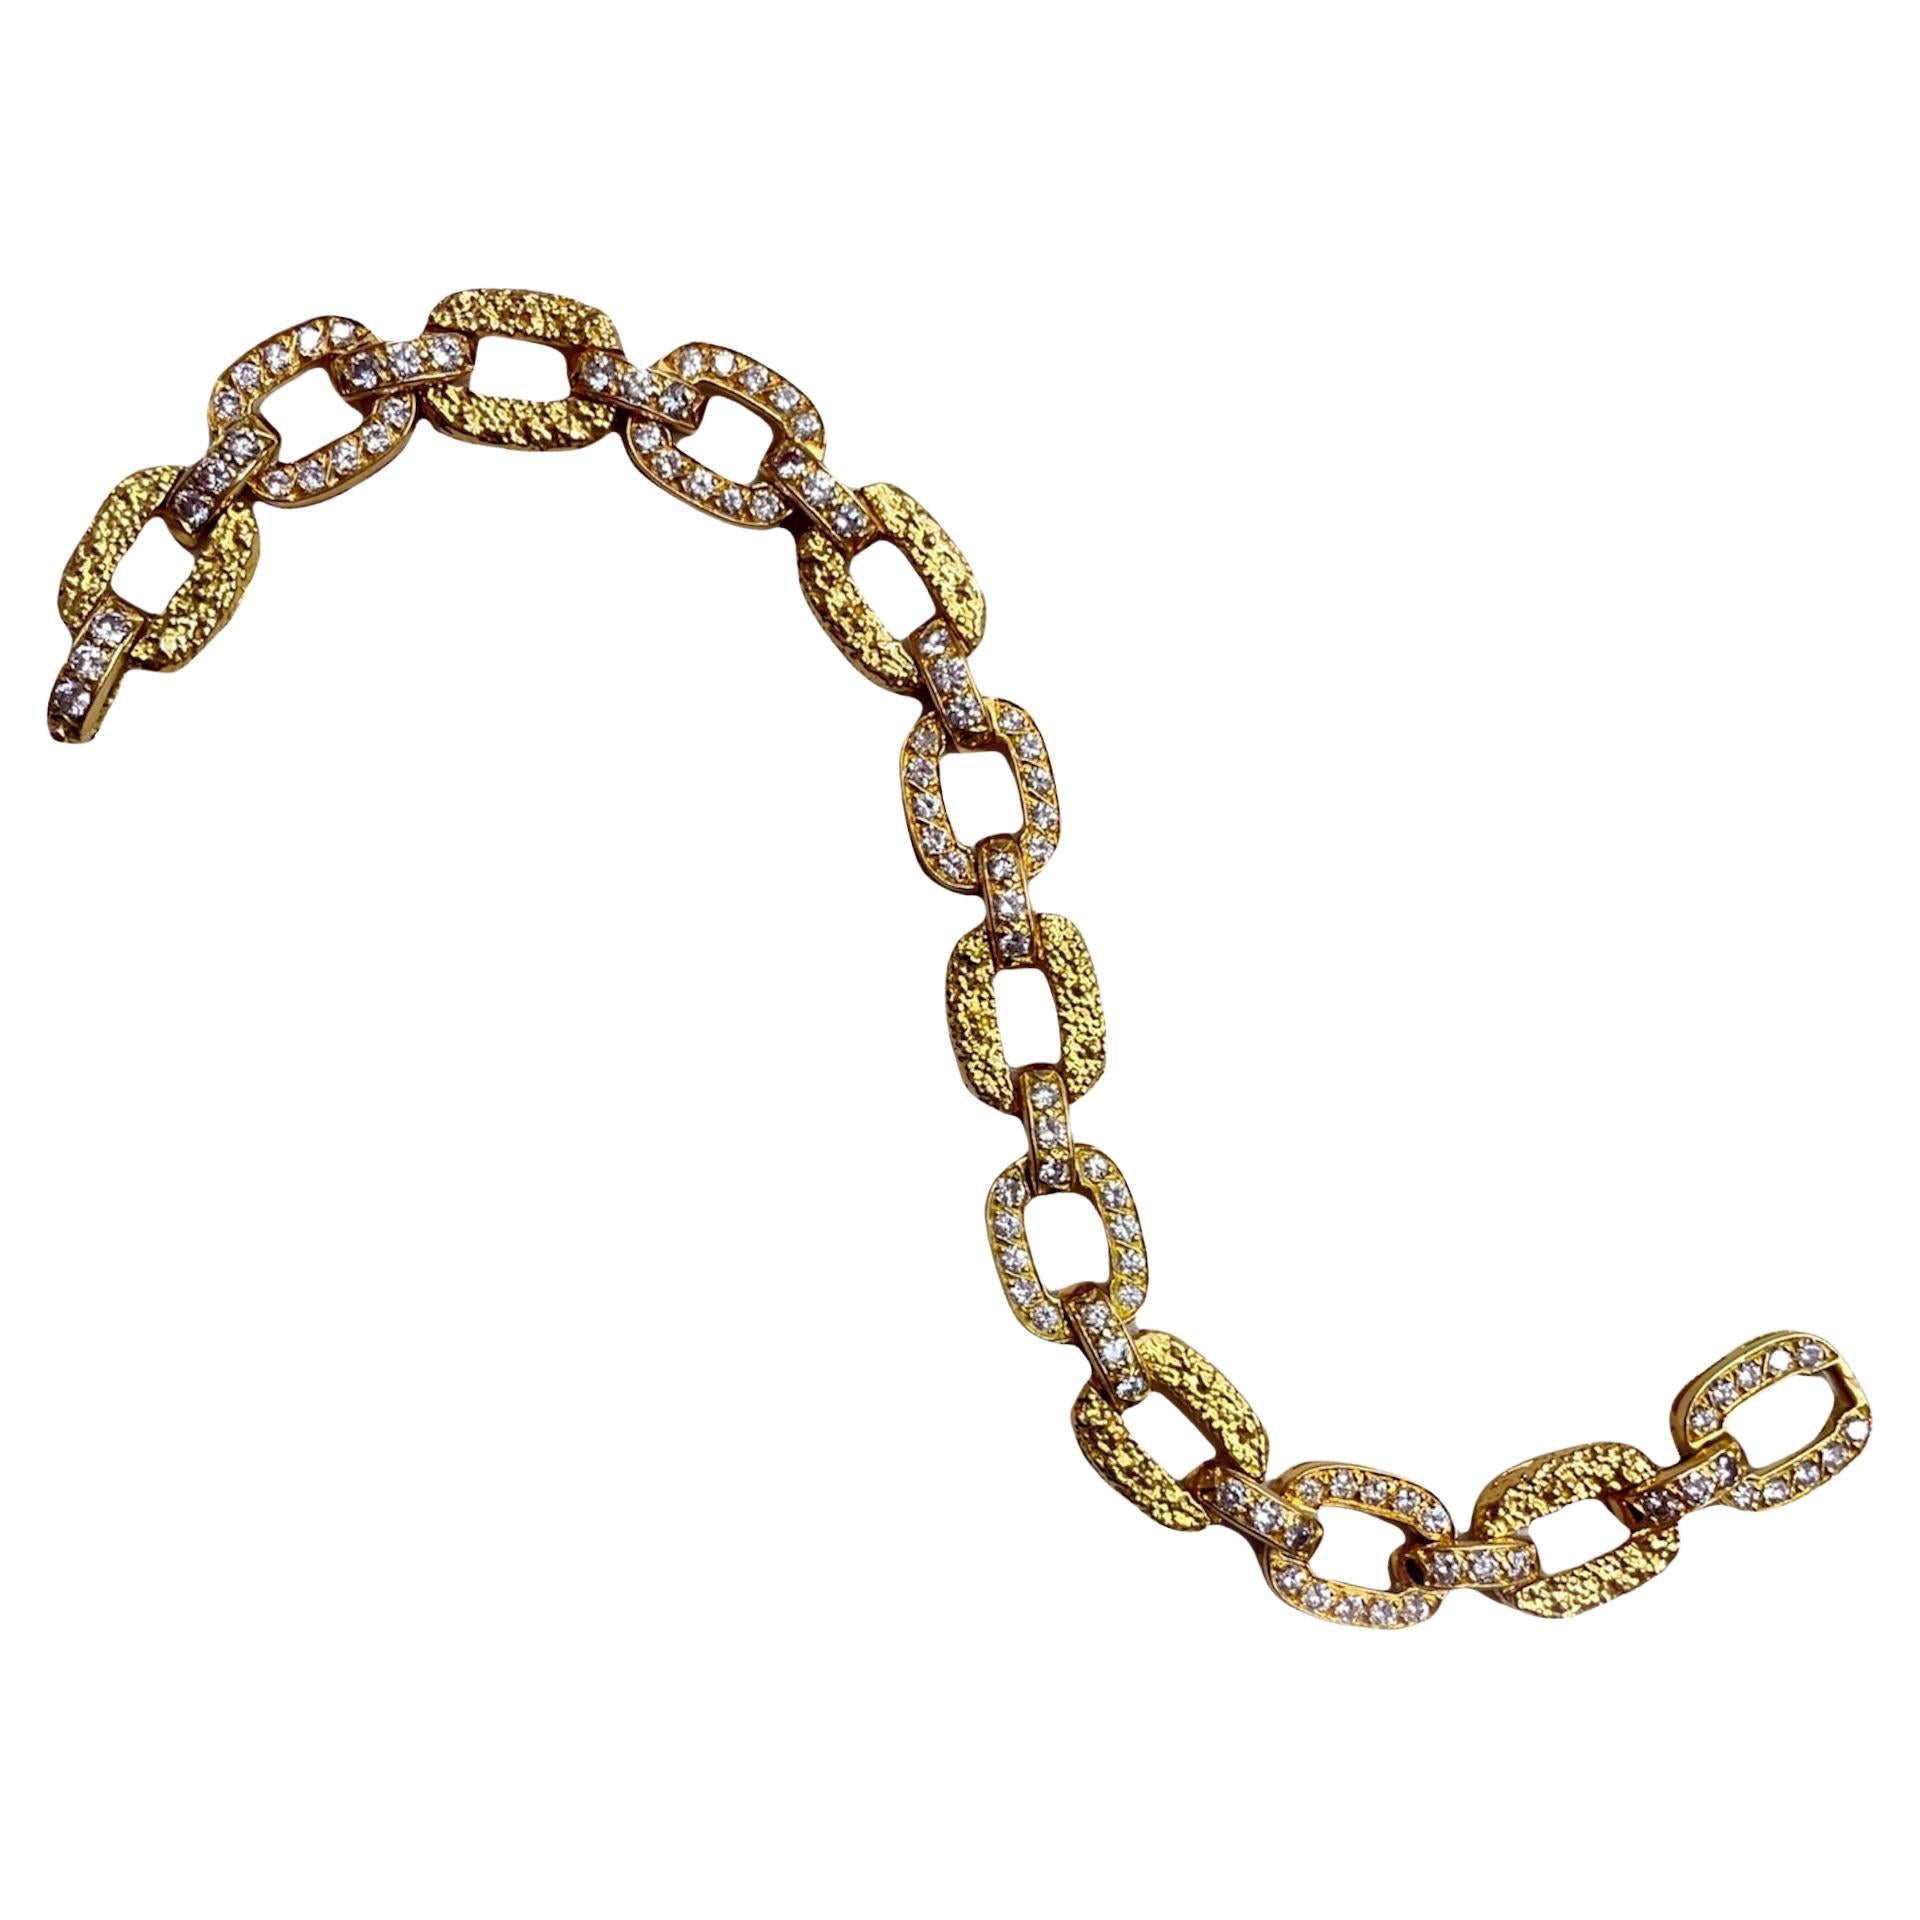 Van Cleef and Arpels Diamond 18k Gold Bracelet, ca. 1940s

A very chic and well wearable diamond and gold link bracelet made by Van Cleef & Arpels. The bracelet alternates with diamond links (ca. 7 carats) and 18k textured gold links. The gold work